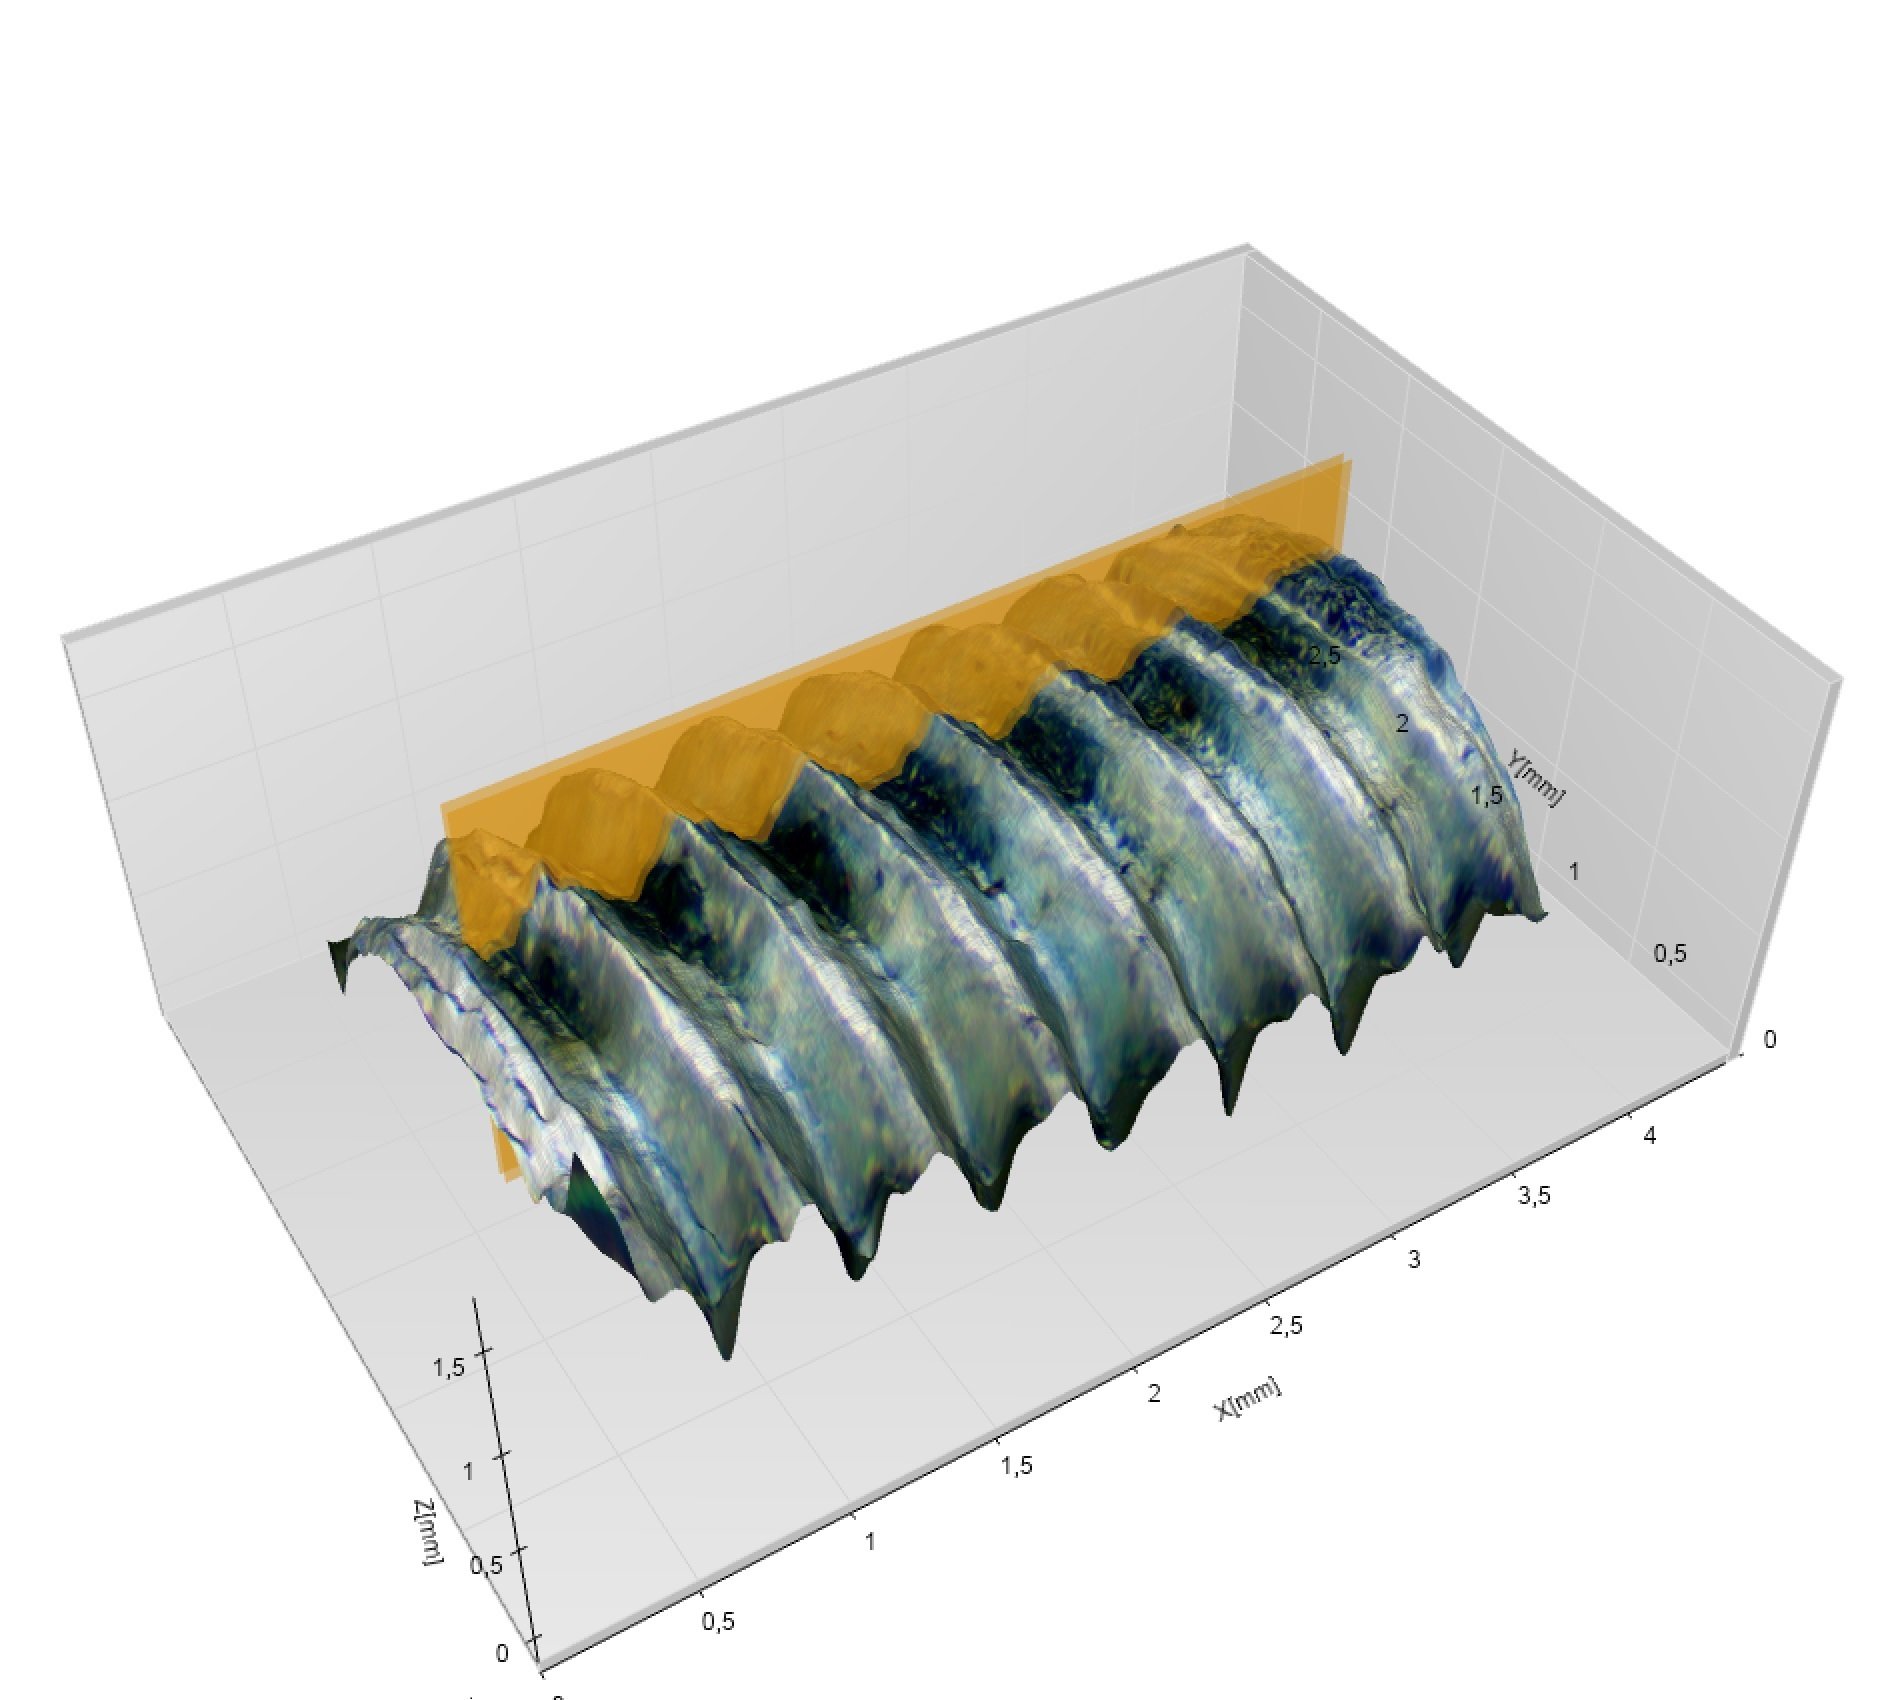 3D topography of a screw